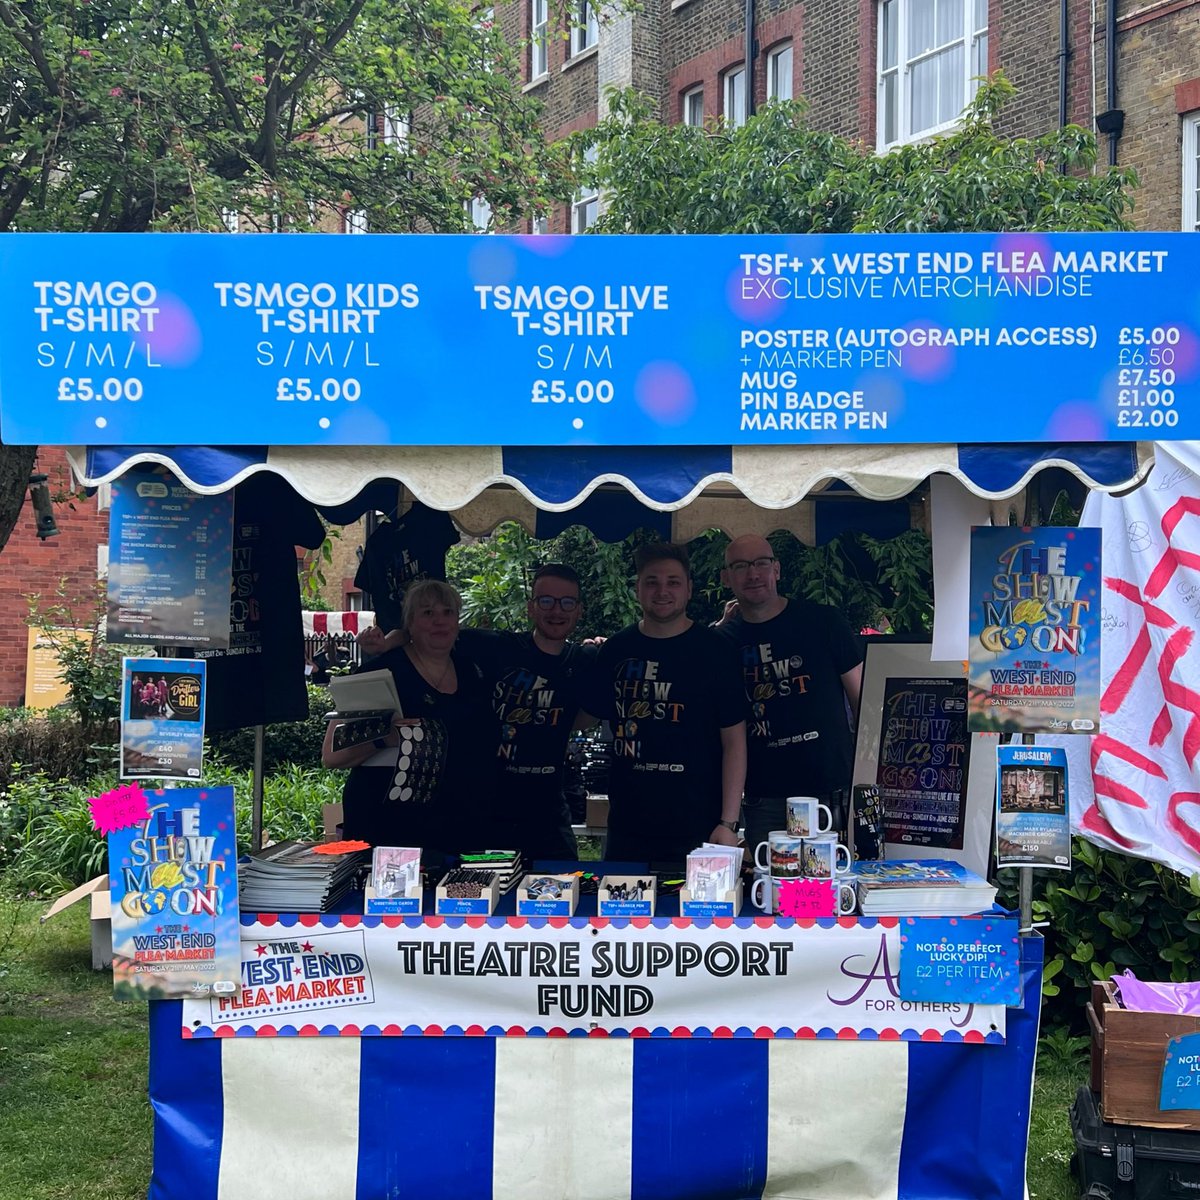 Team @theatre_support are out in full force today for The West End Flea Market at St Paul’s in Covent Garden. Get your hands on LIMITED EDITION merchandise and by buying one of The Show Must Go On! x The West End Flea Market £5 poster, you’ll get access to the Autograph Tent 🎪